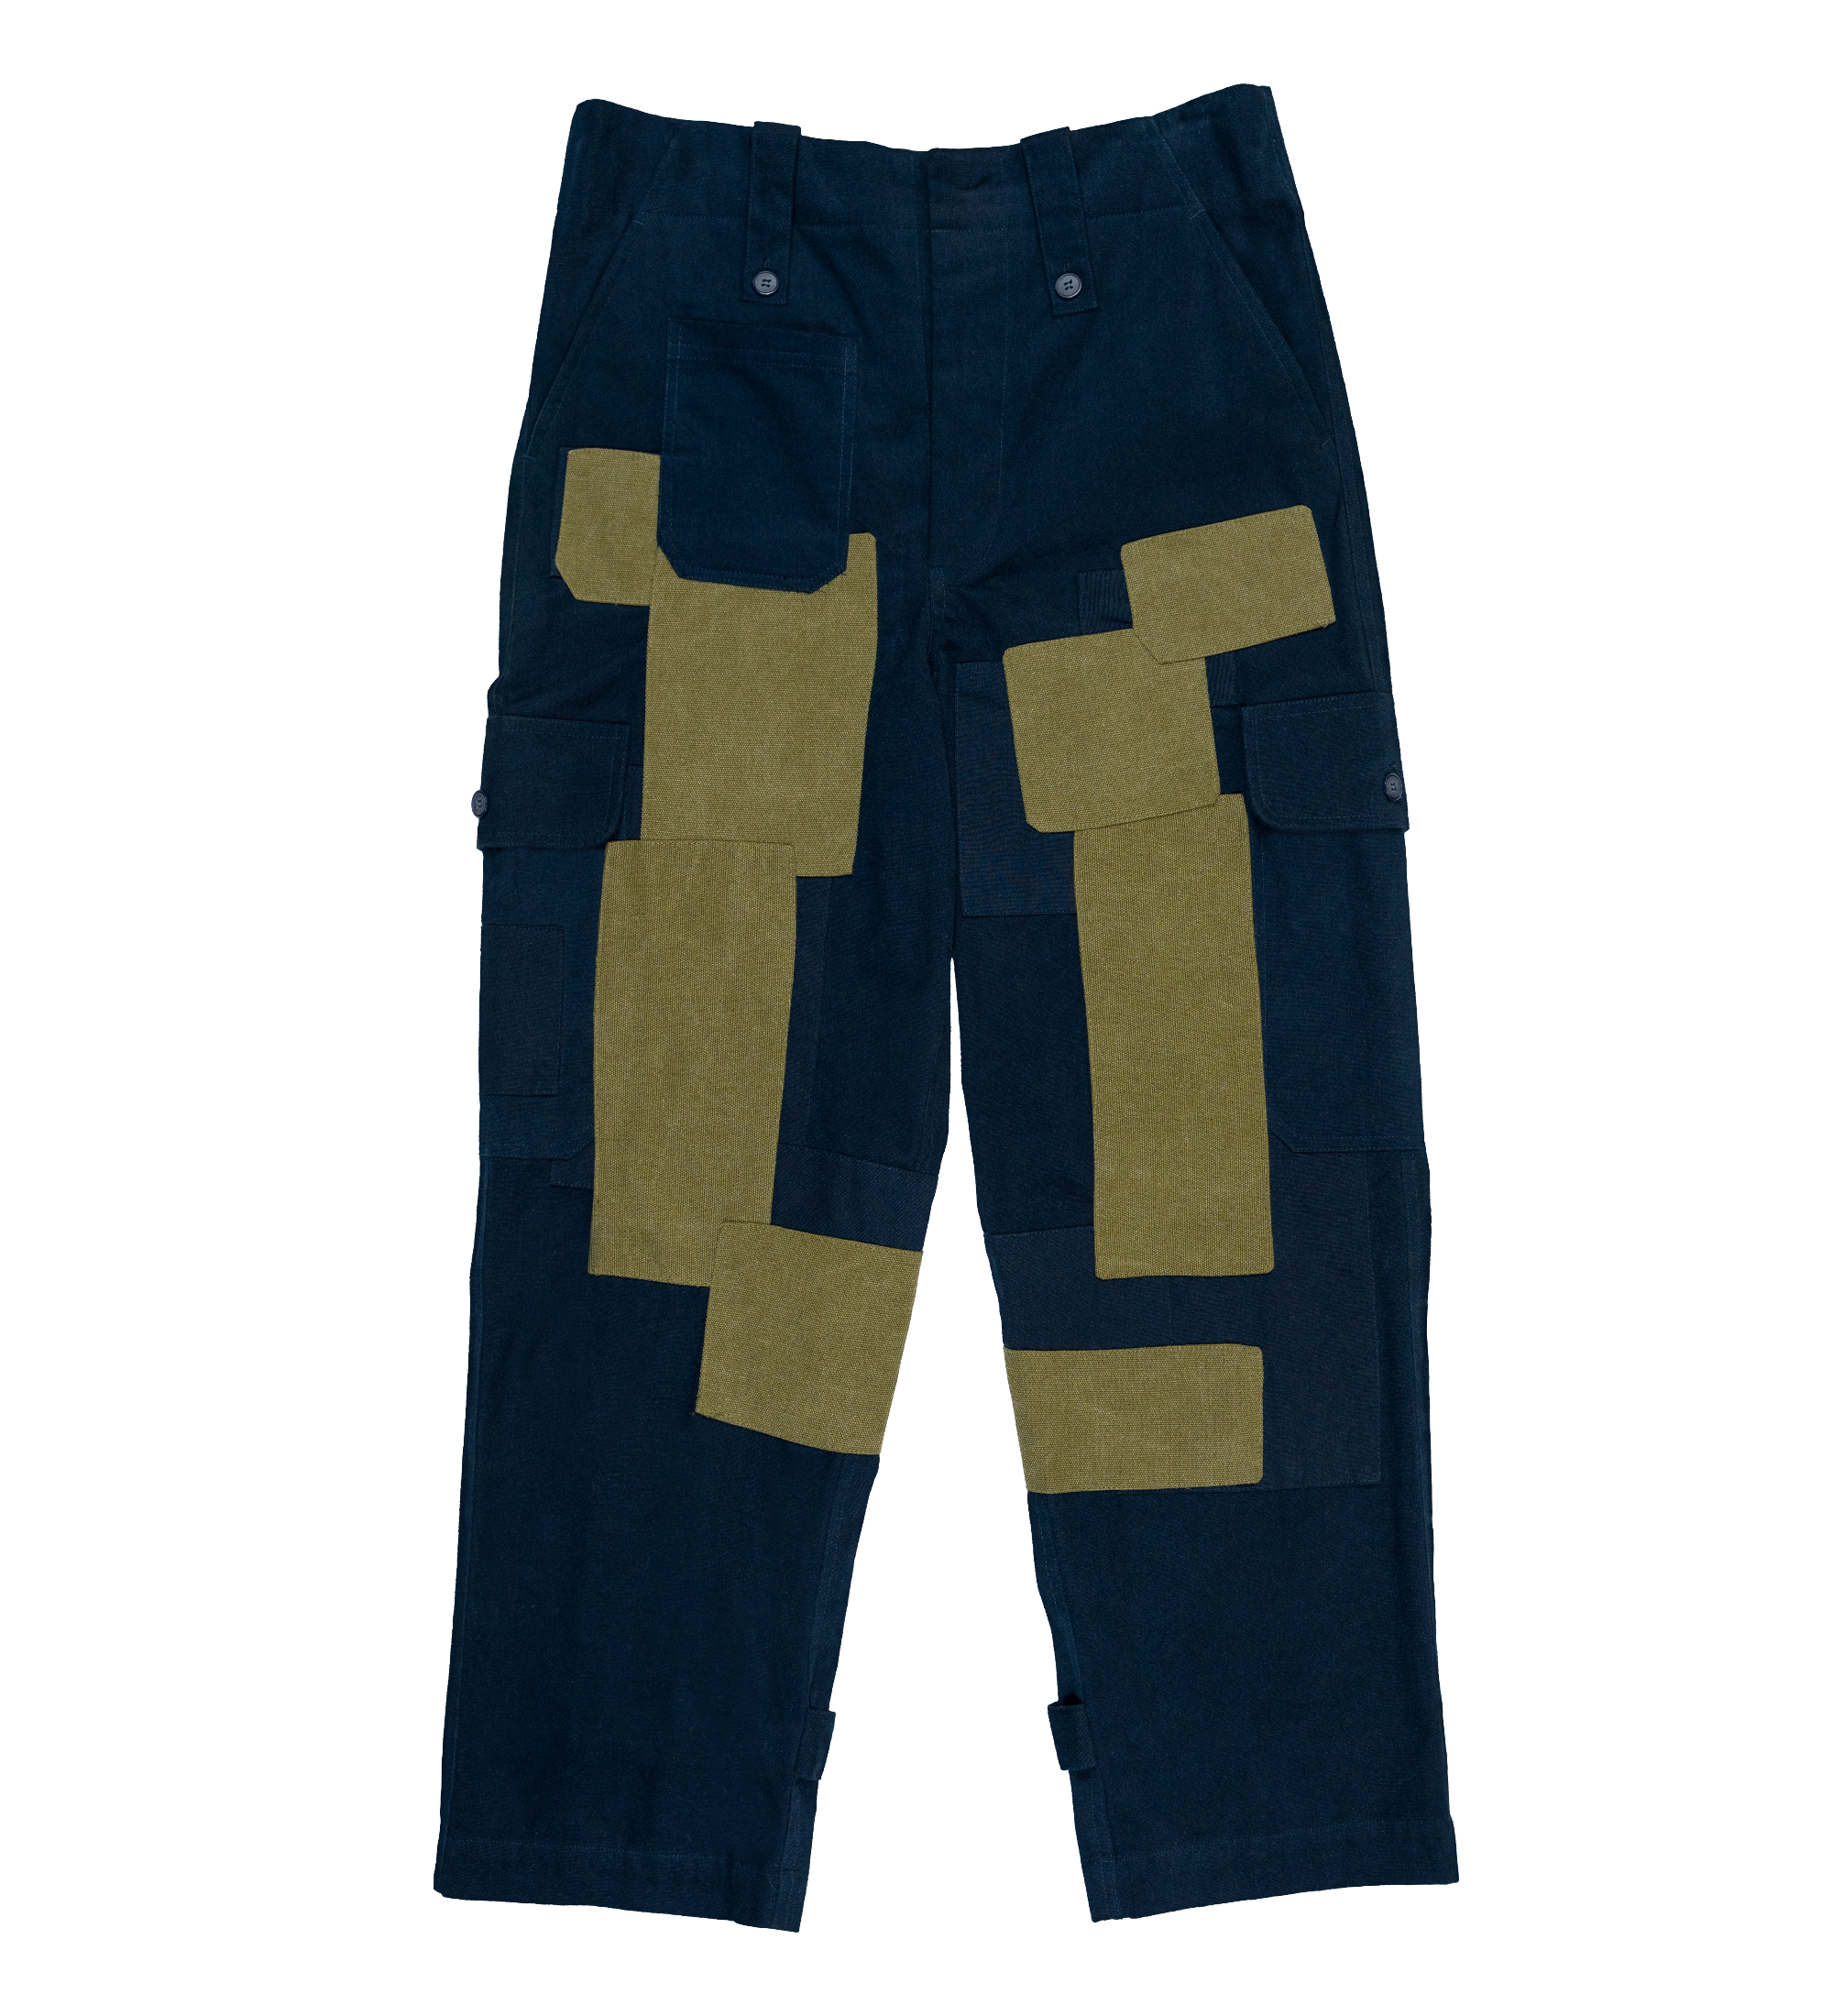 Military Patchwork Pants